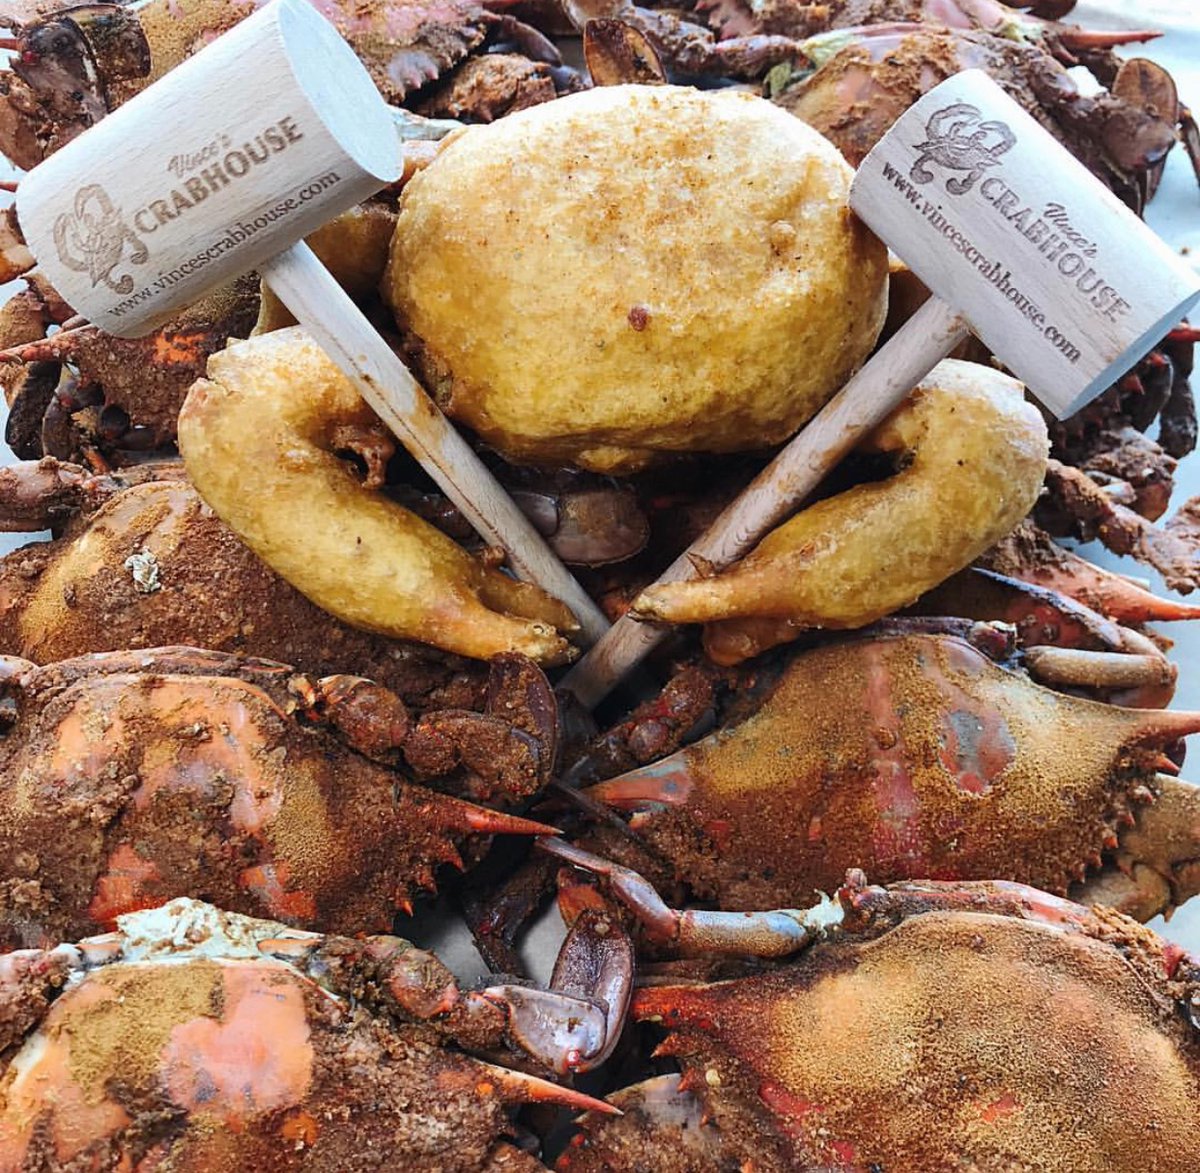 Steamed Crab, Fried Hard Crab or Soft Crab ? 🤔
Which is your favorite ... For me its the Fried Hard Crab 😛
Either way no worries we have them all !! 

#goodeats #deals #giveaways #freshseafood #crabs #shoplocal #crabbers #crabbypretzel #tasty #goodeats #grub #summertimeblues...